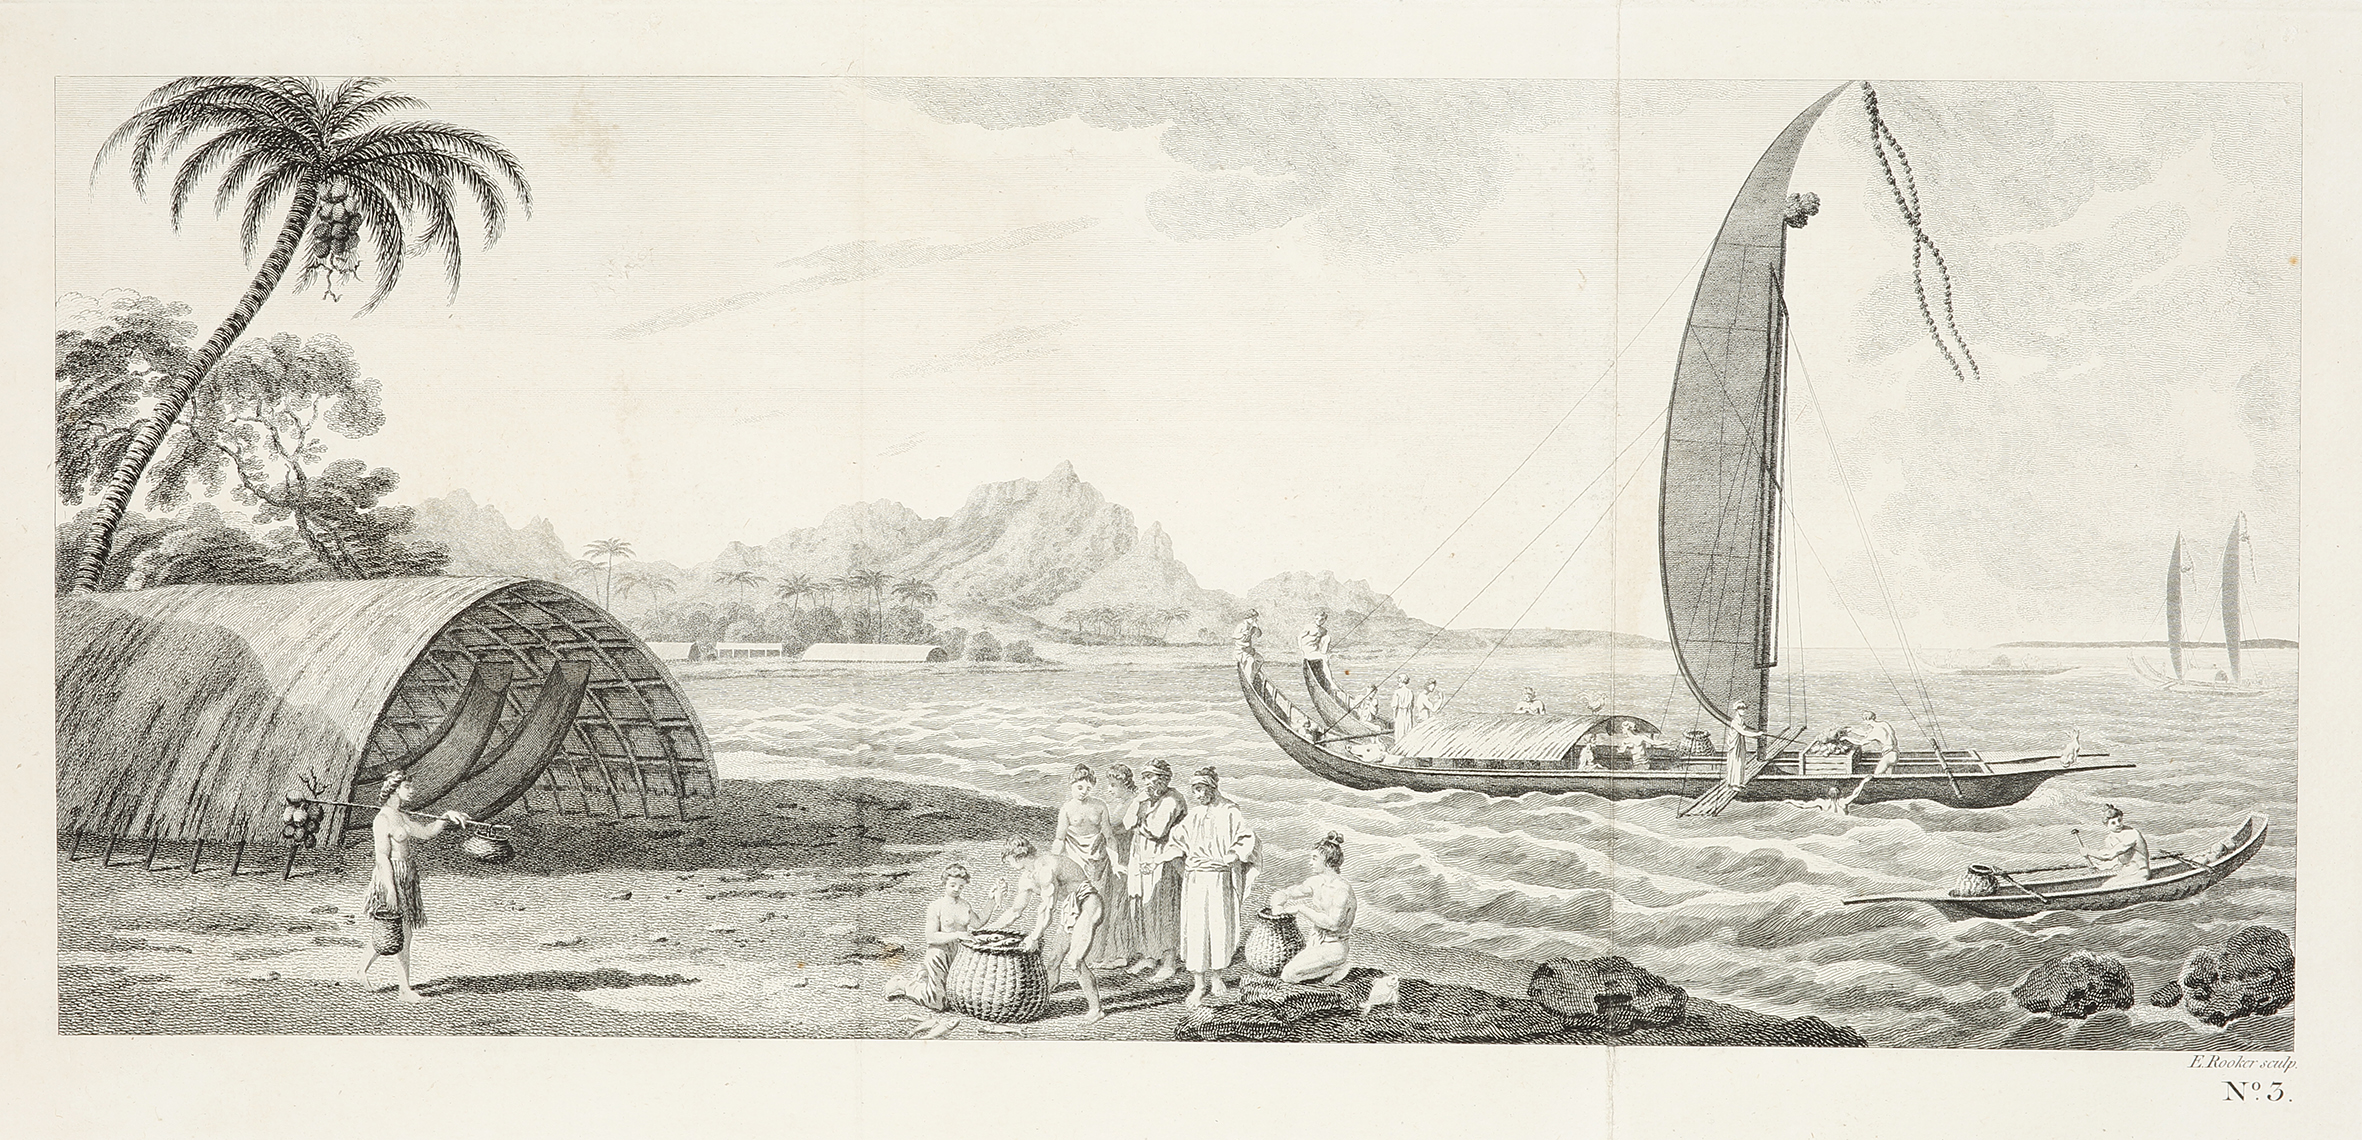 [A View of the Island of Ulietea, with a double canoe and a boathouse.] - Antique View from 1773